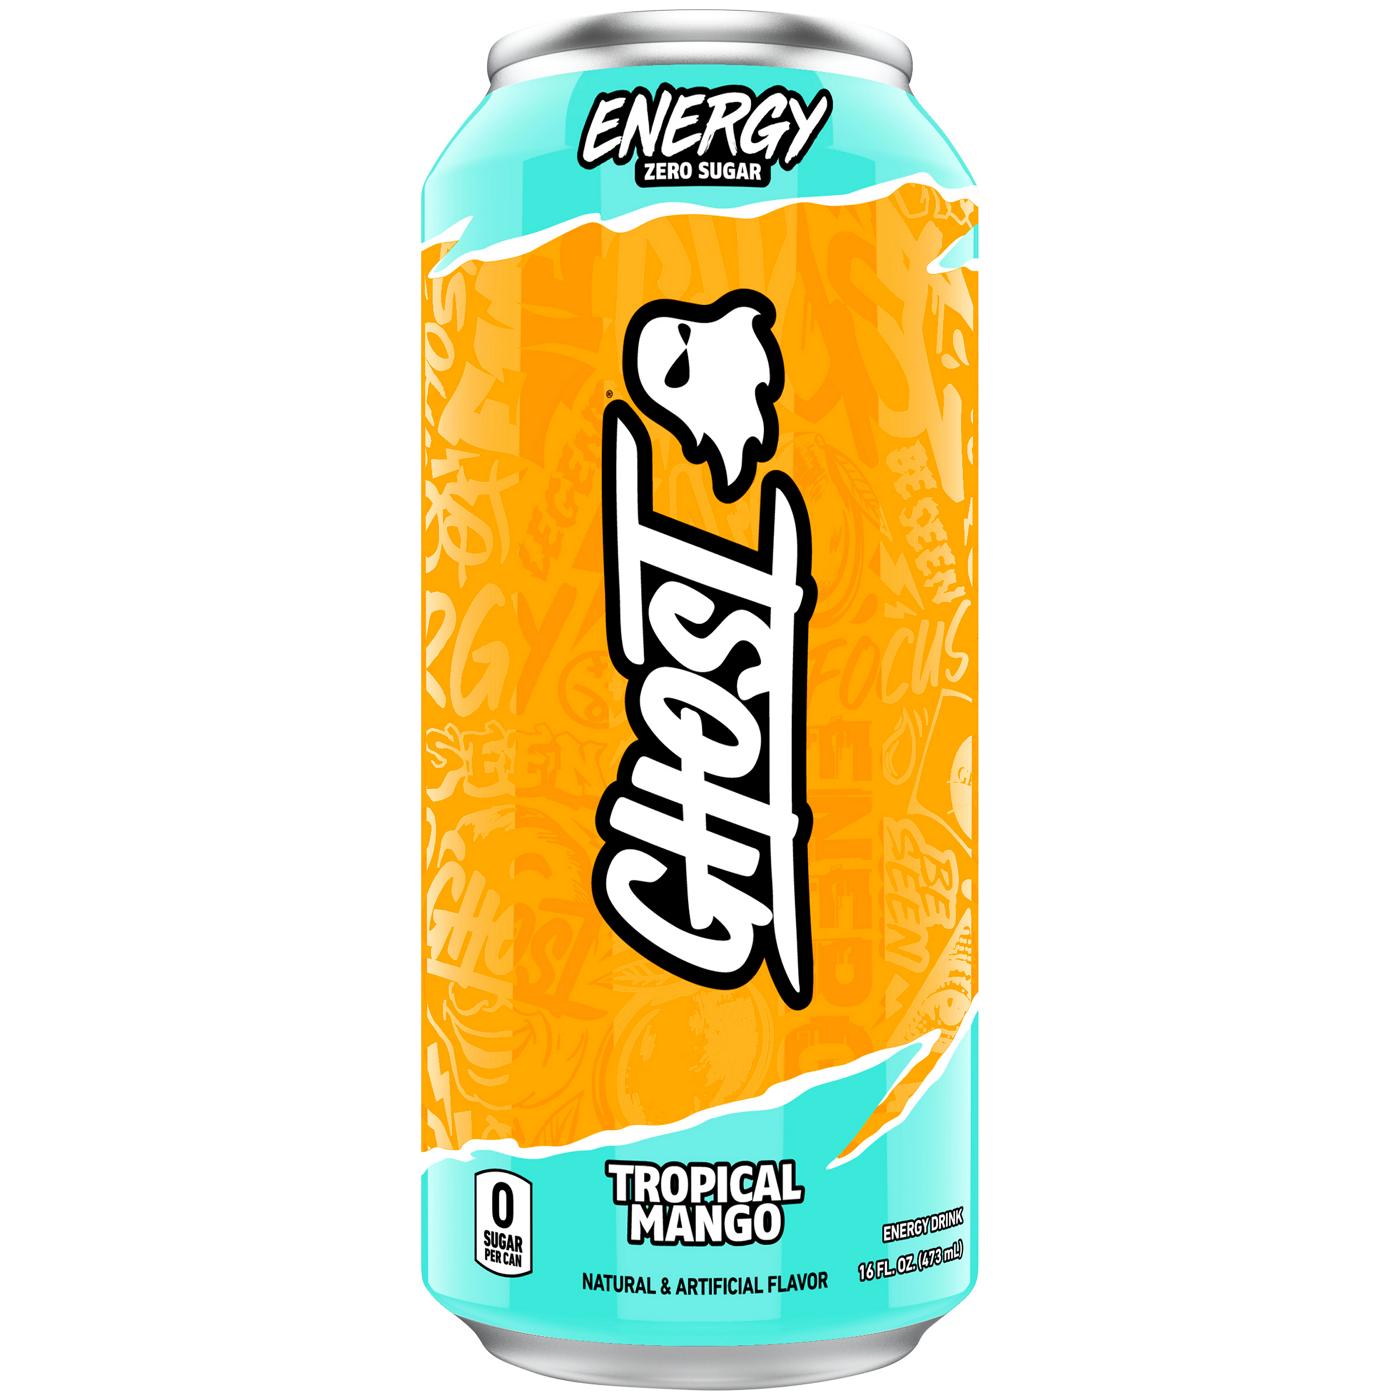 Ghost Energy Tropical Mango Drink; image 2 of 2